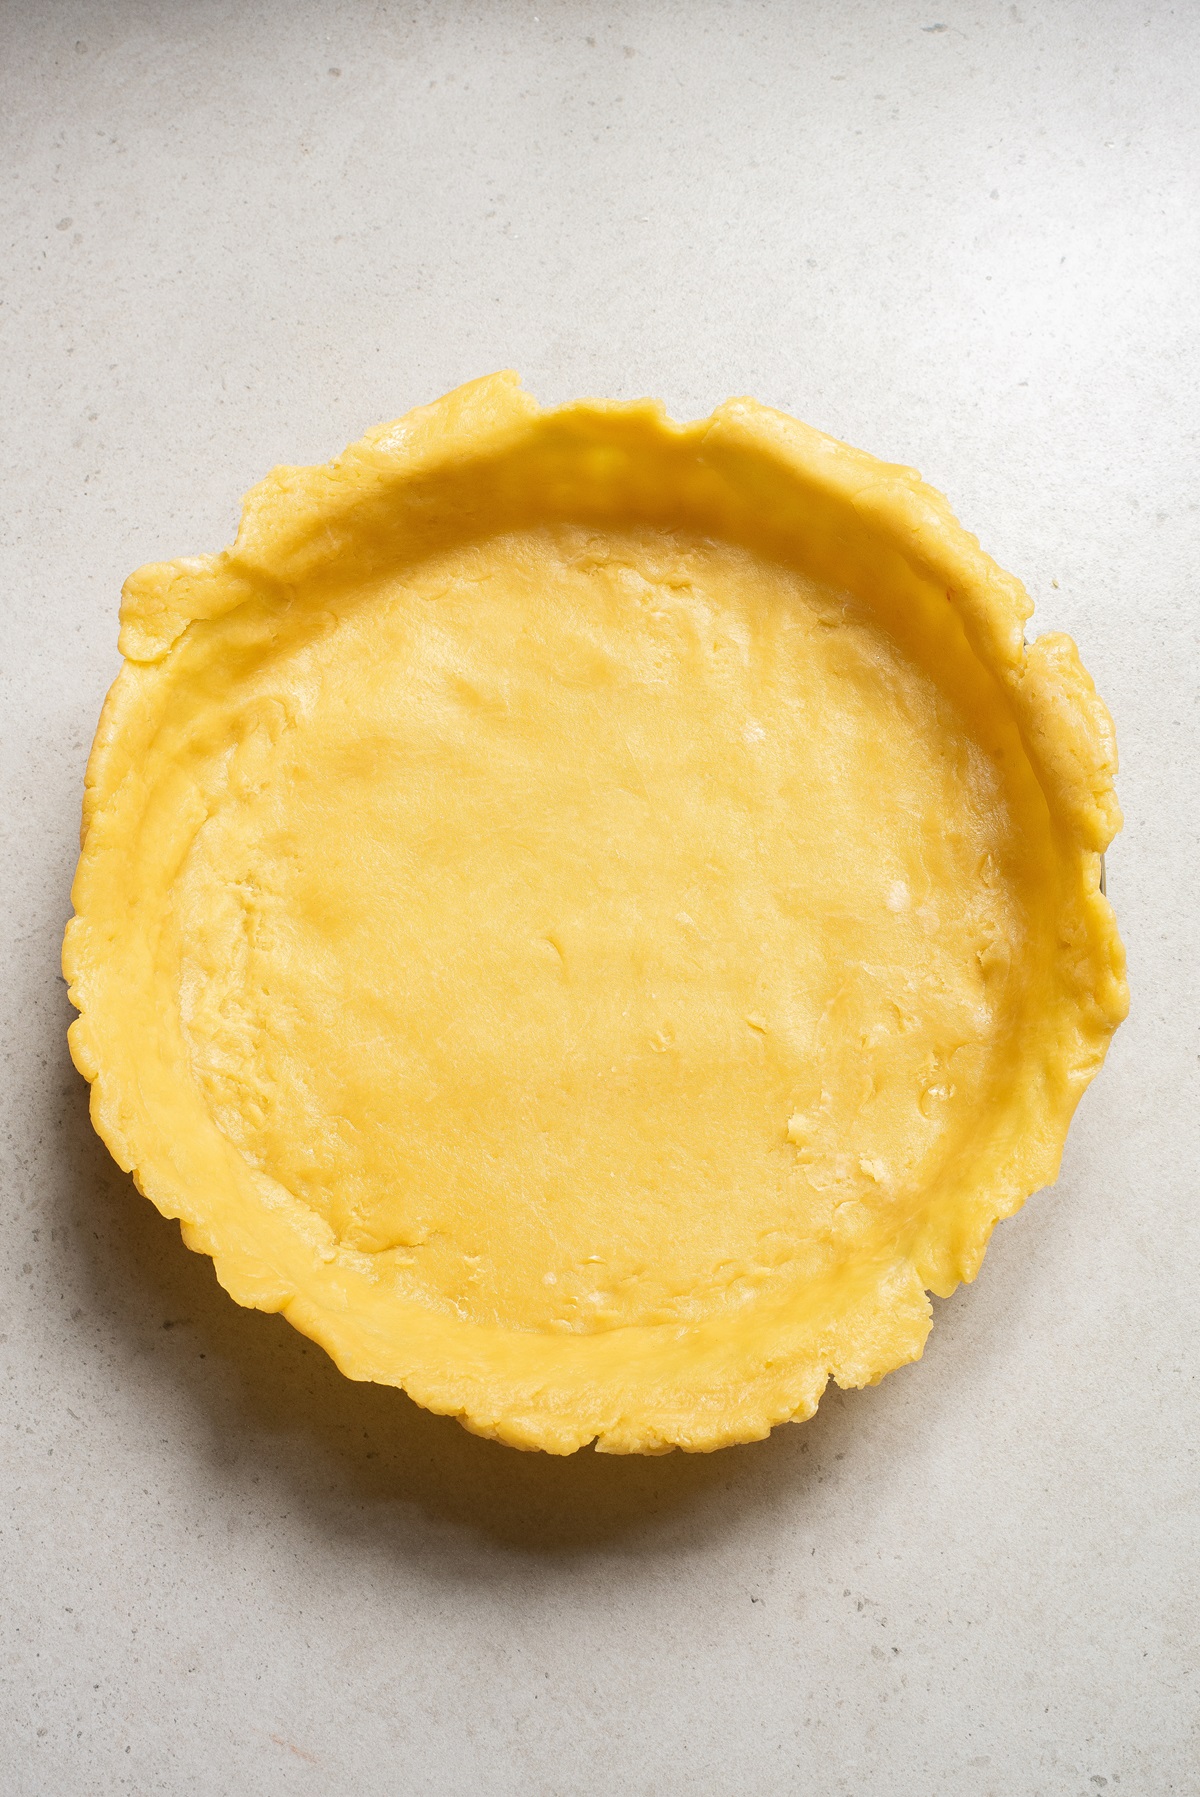 A pie crust shaped into a pie dish.